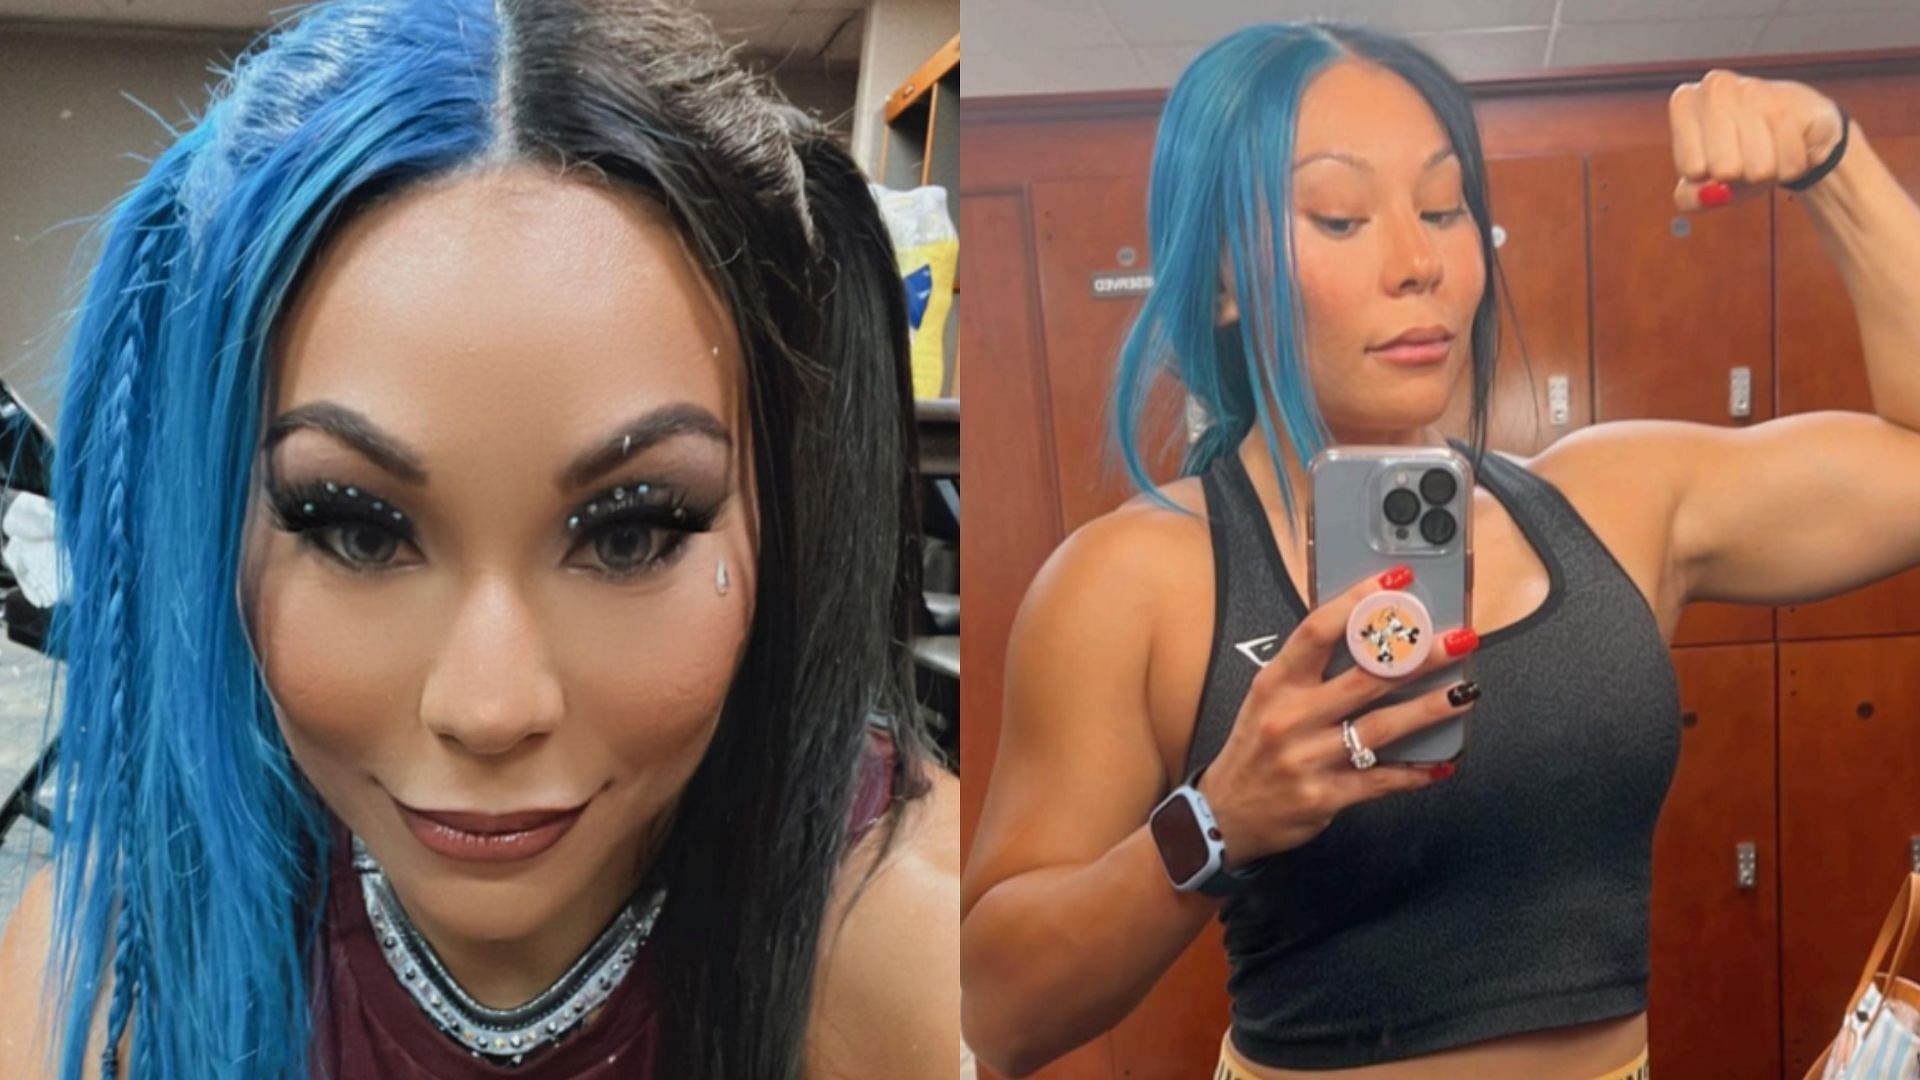 Michin (Mia Yim) is currently a part of the RAW roster.